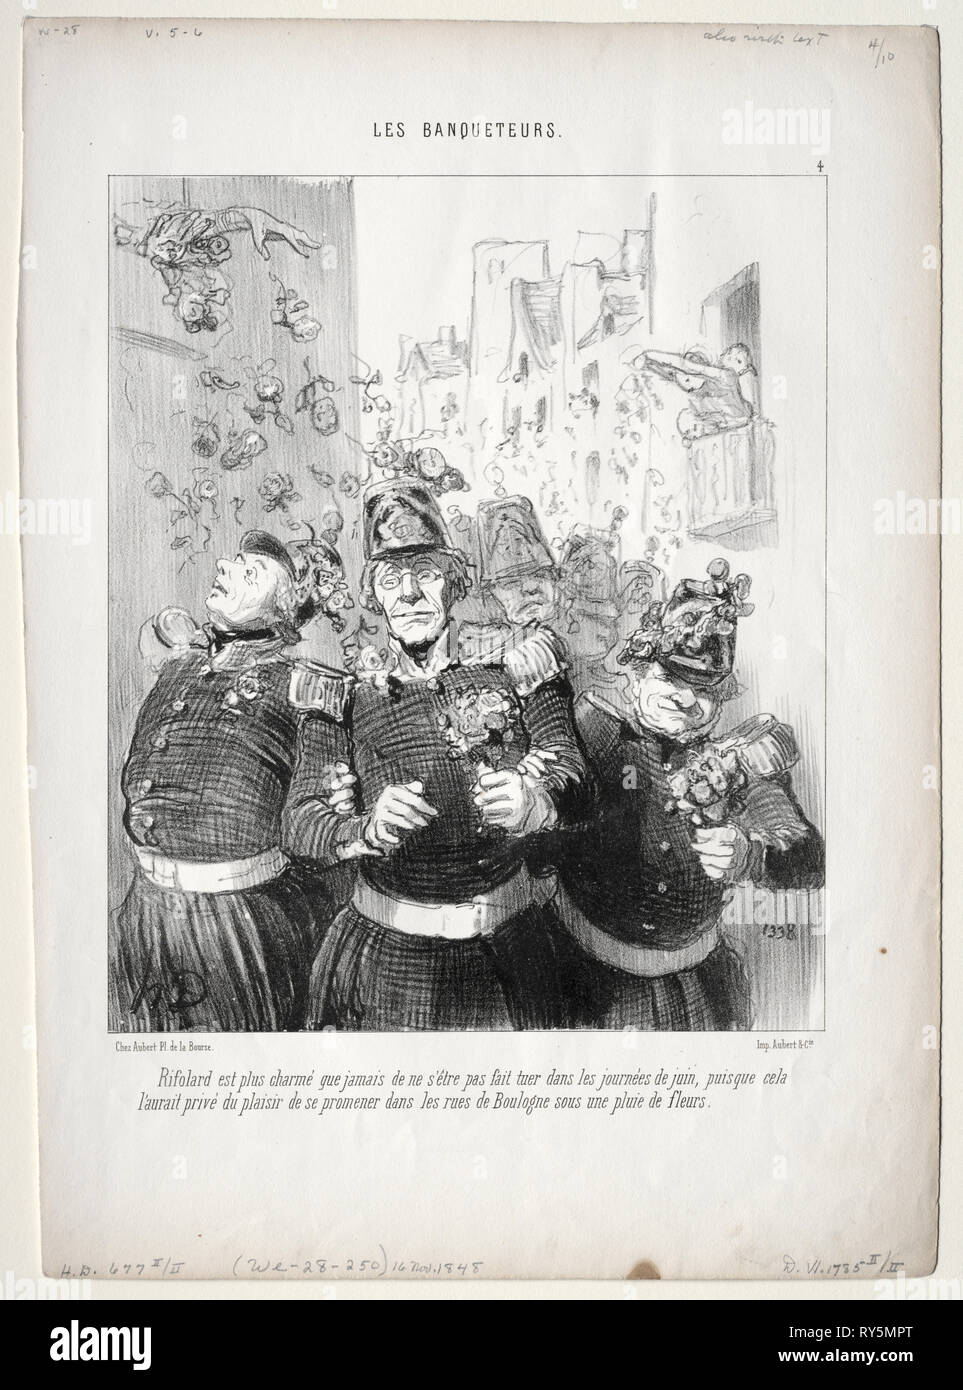 published in le Charivari (11 January 1849): The Banqueters, plate 4: Rifolard is more charming than ever..., 1848. Honoré Daumier (French, 1808-1879). Lithograph; sheet: 35.8 x 25.6 cm (14 1/8 x 10 1/16 in.); image: 24.3 x 20.4 cm (9 9/16 x 8 1/16 in Stock Photo